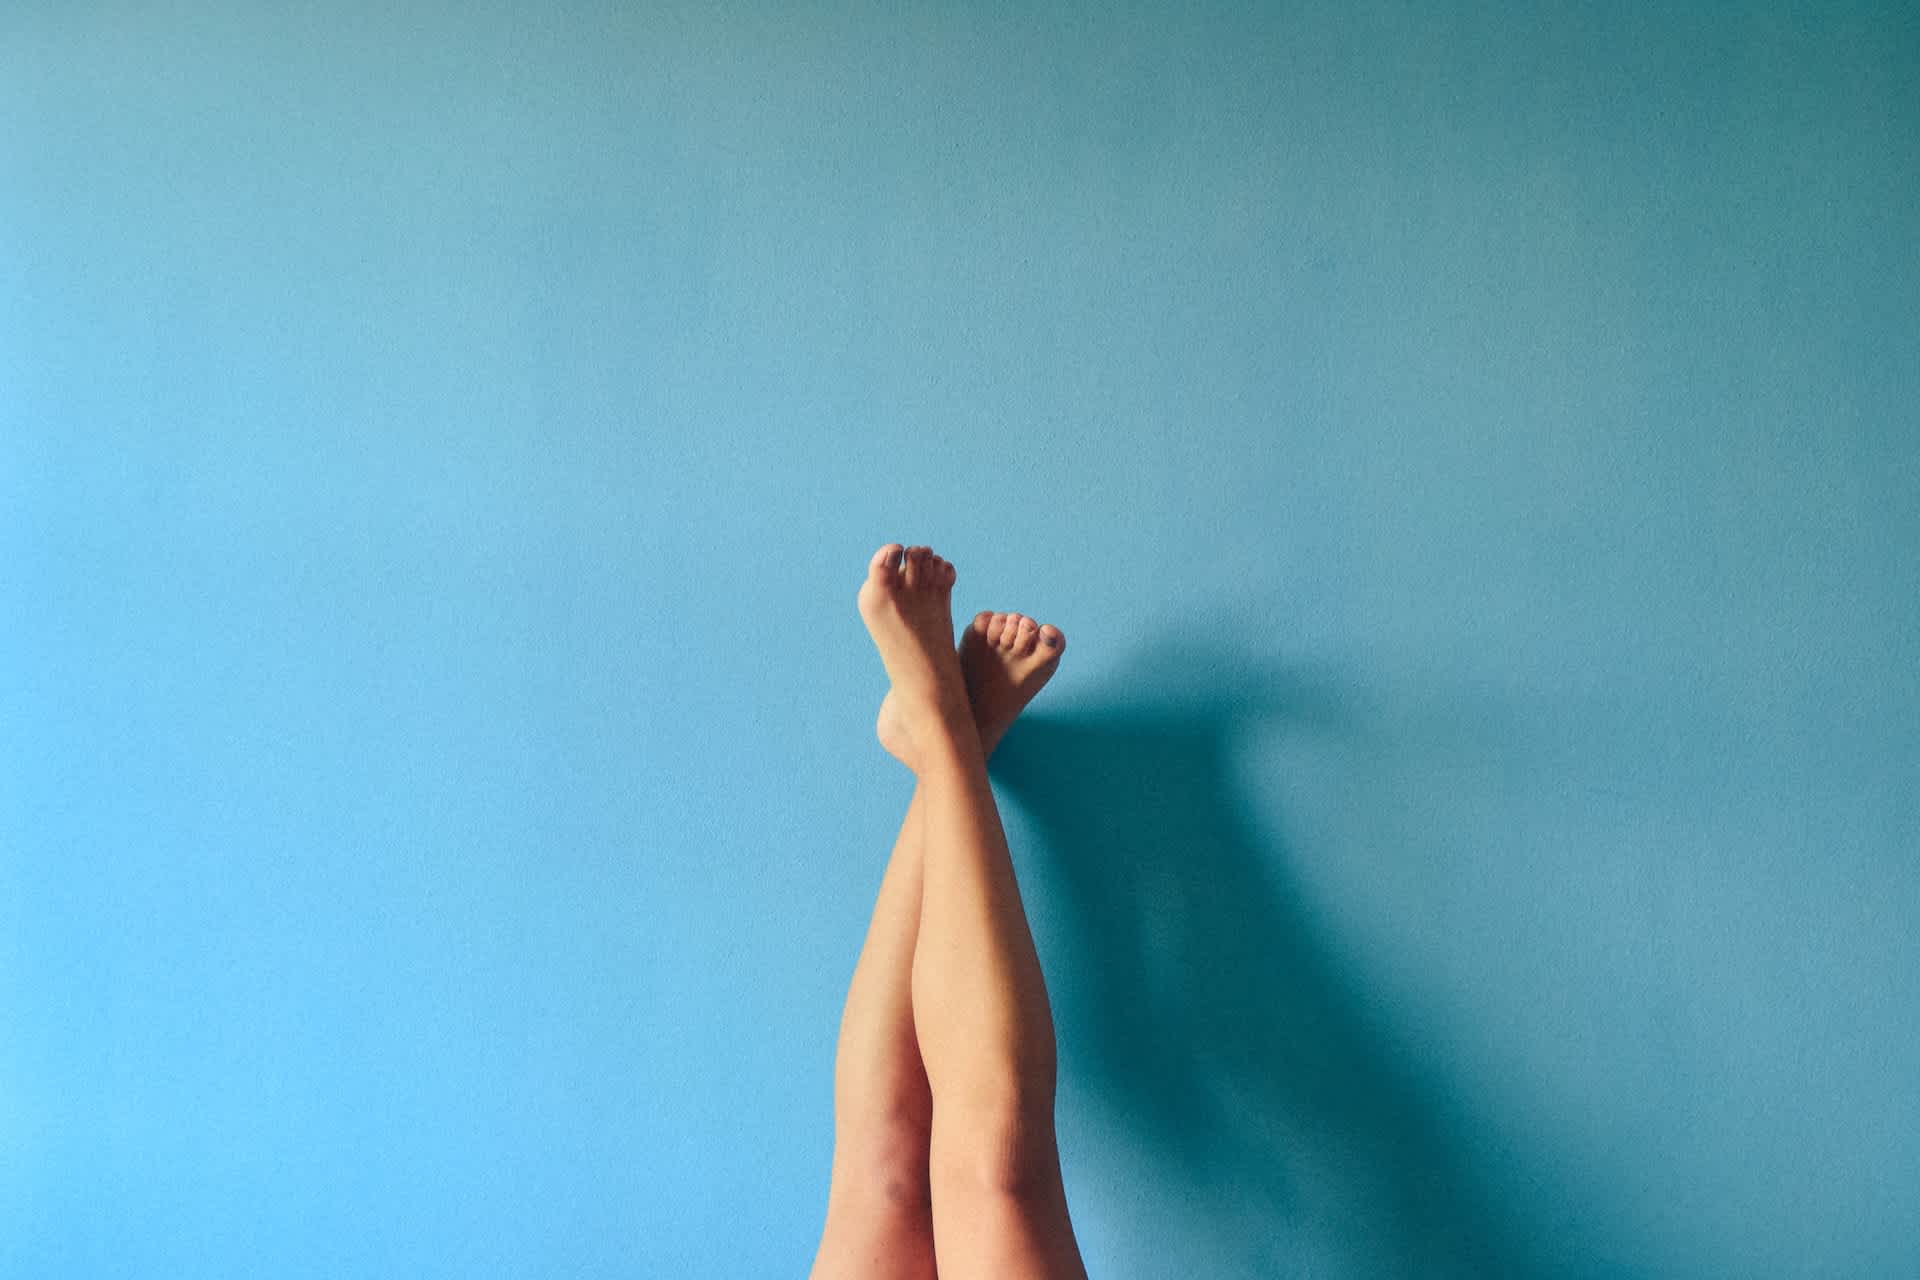 A woman's legs against a blue background